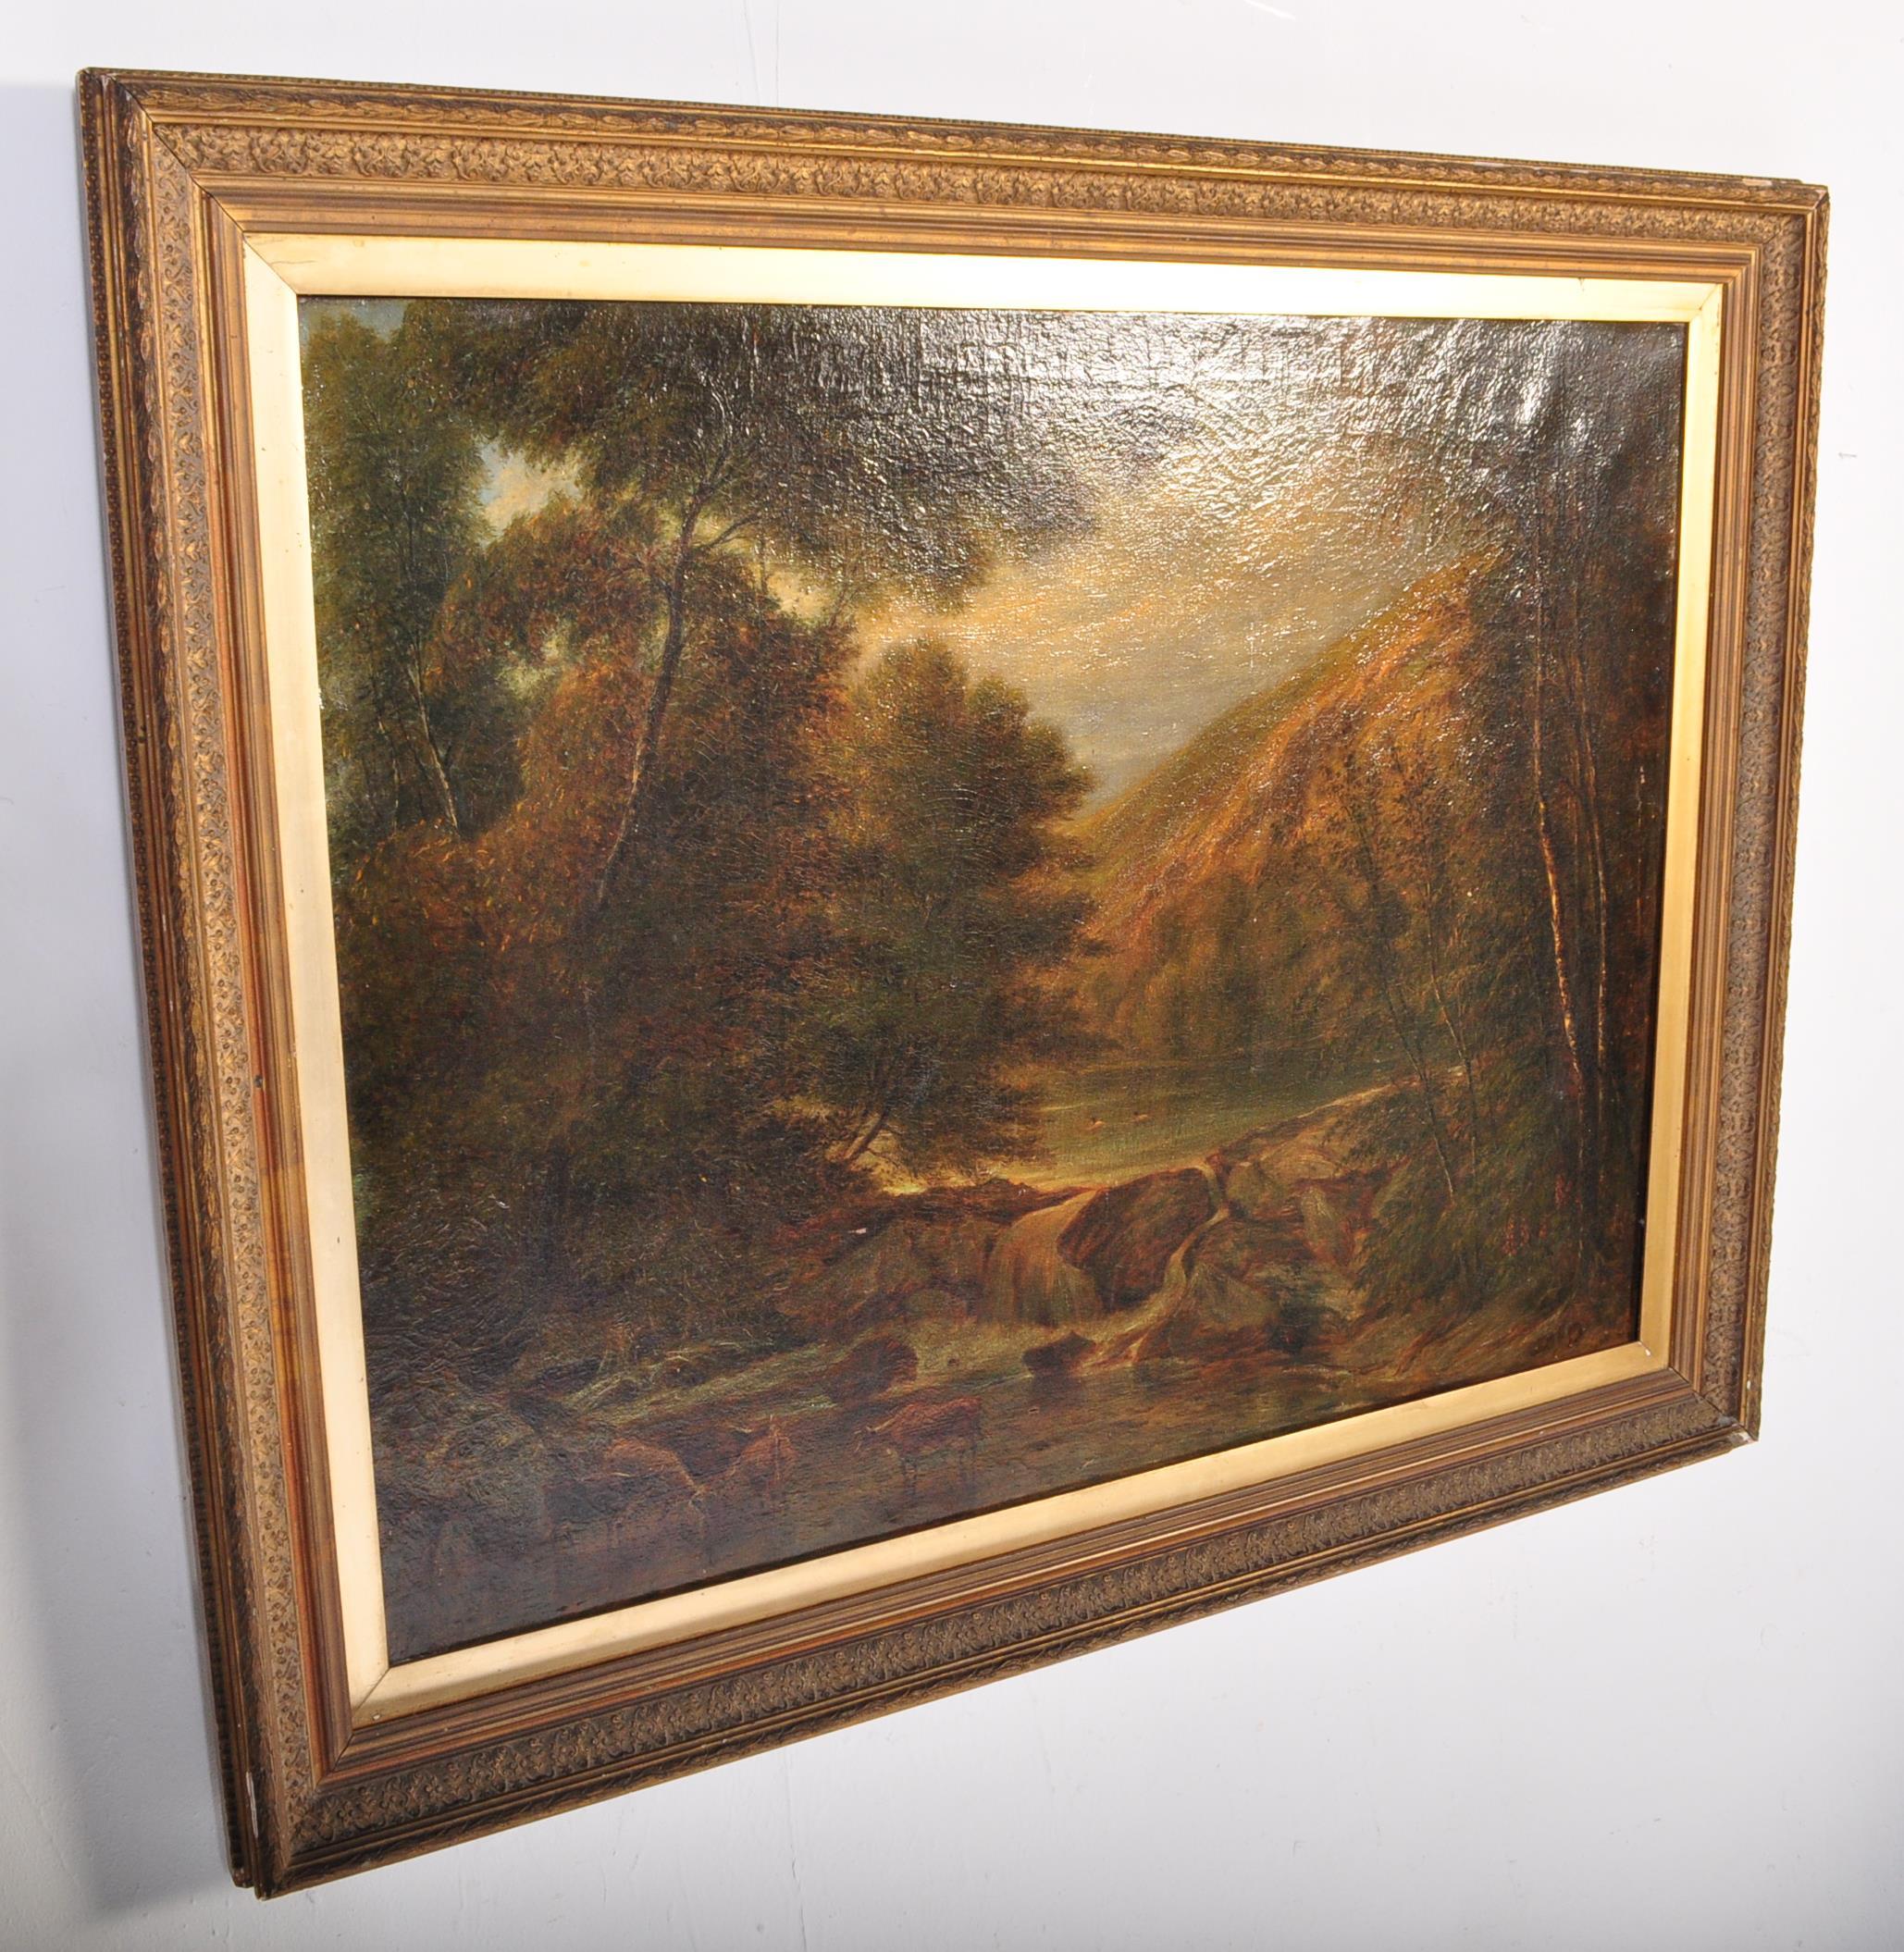 19TH CENTURY ENGLISH OIL ON CANVAS LANDSCAPE PAINTING - Image 4 of 5